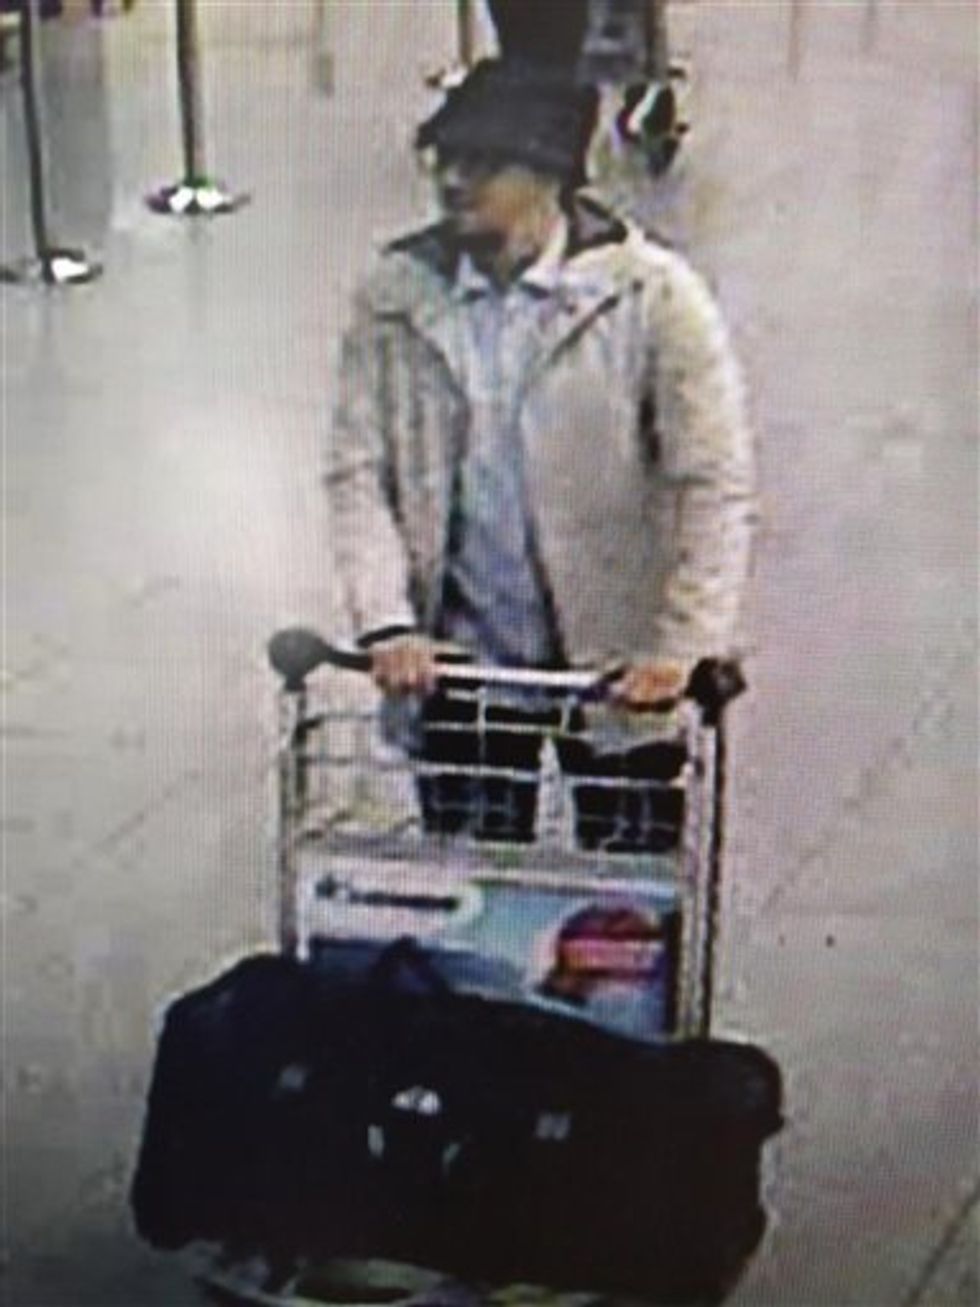 New Video Emerges Showing Alleged Brussels Bomber Leaving Airport Moments After Deadly Attack